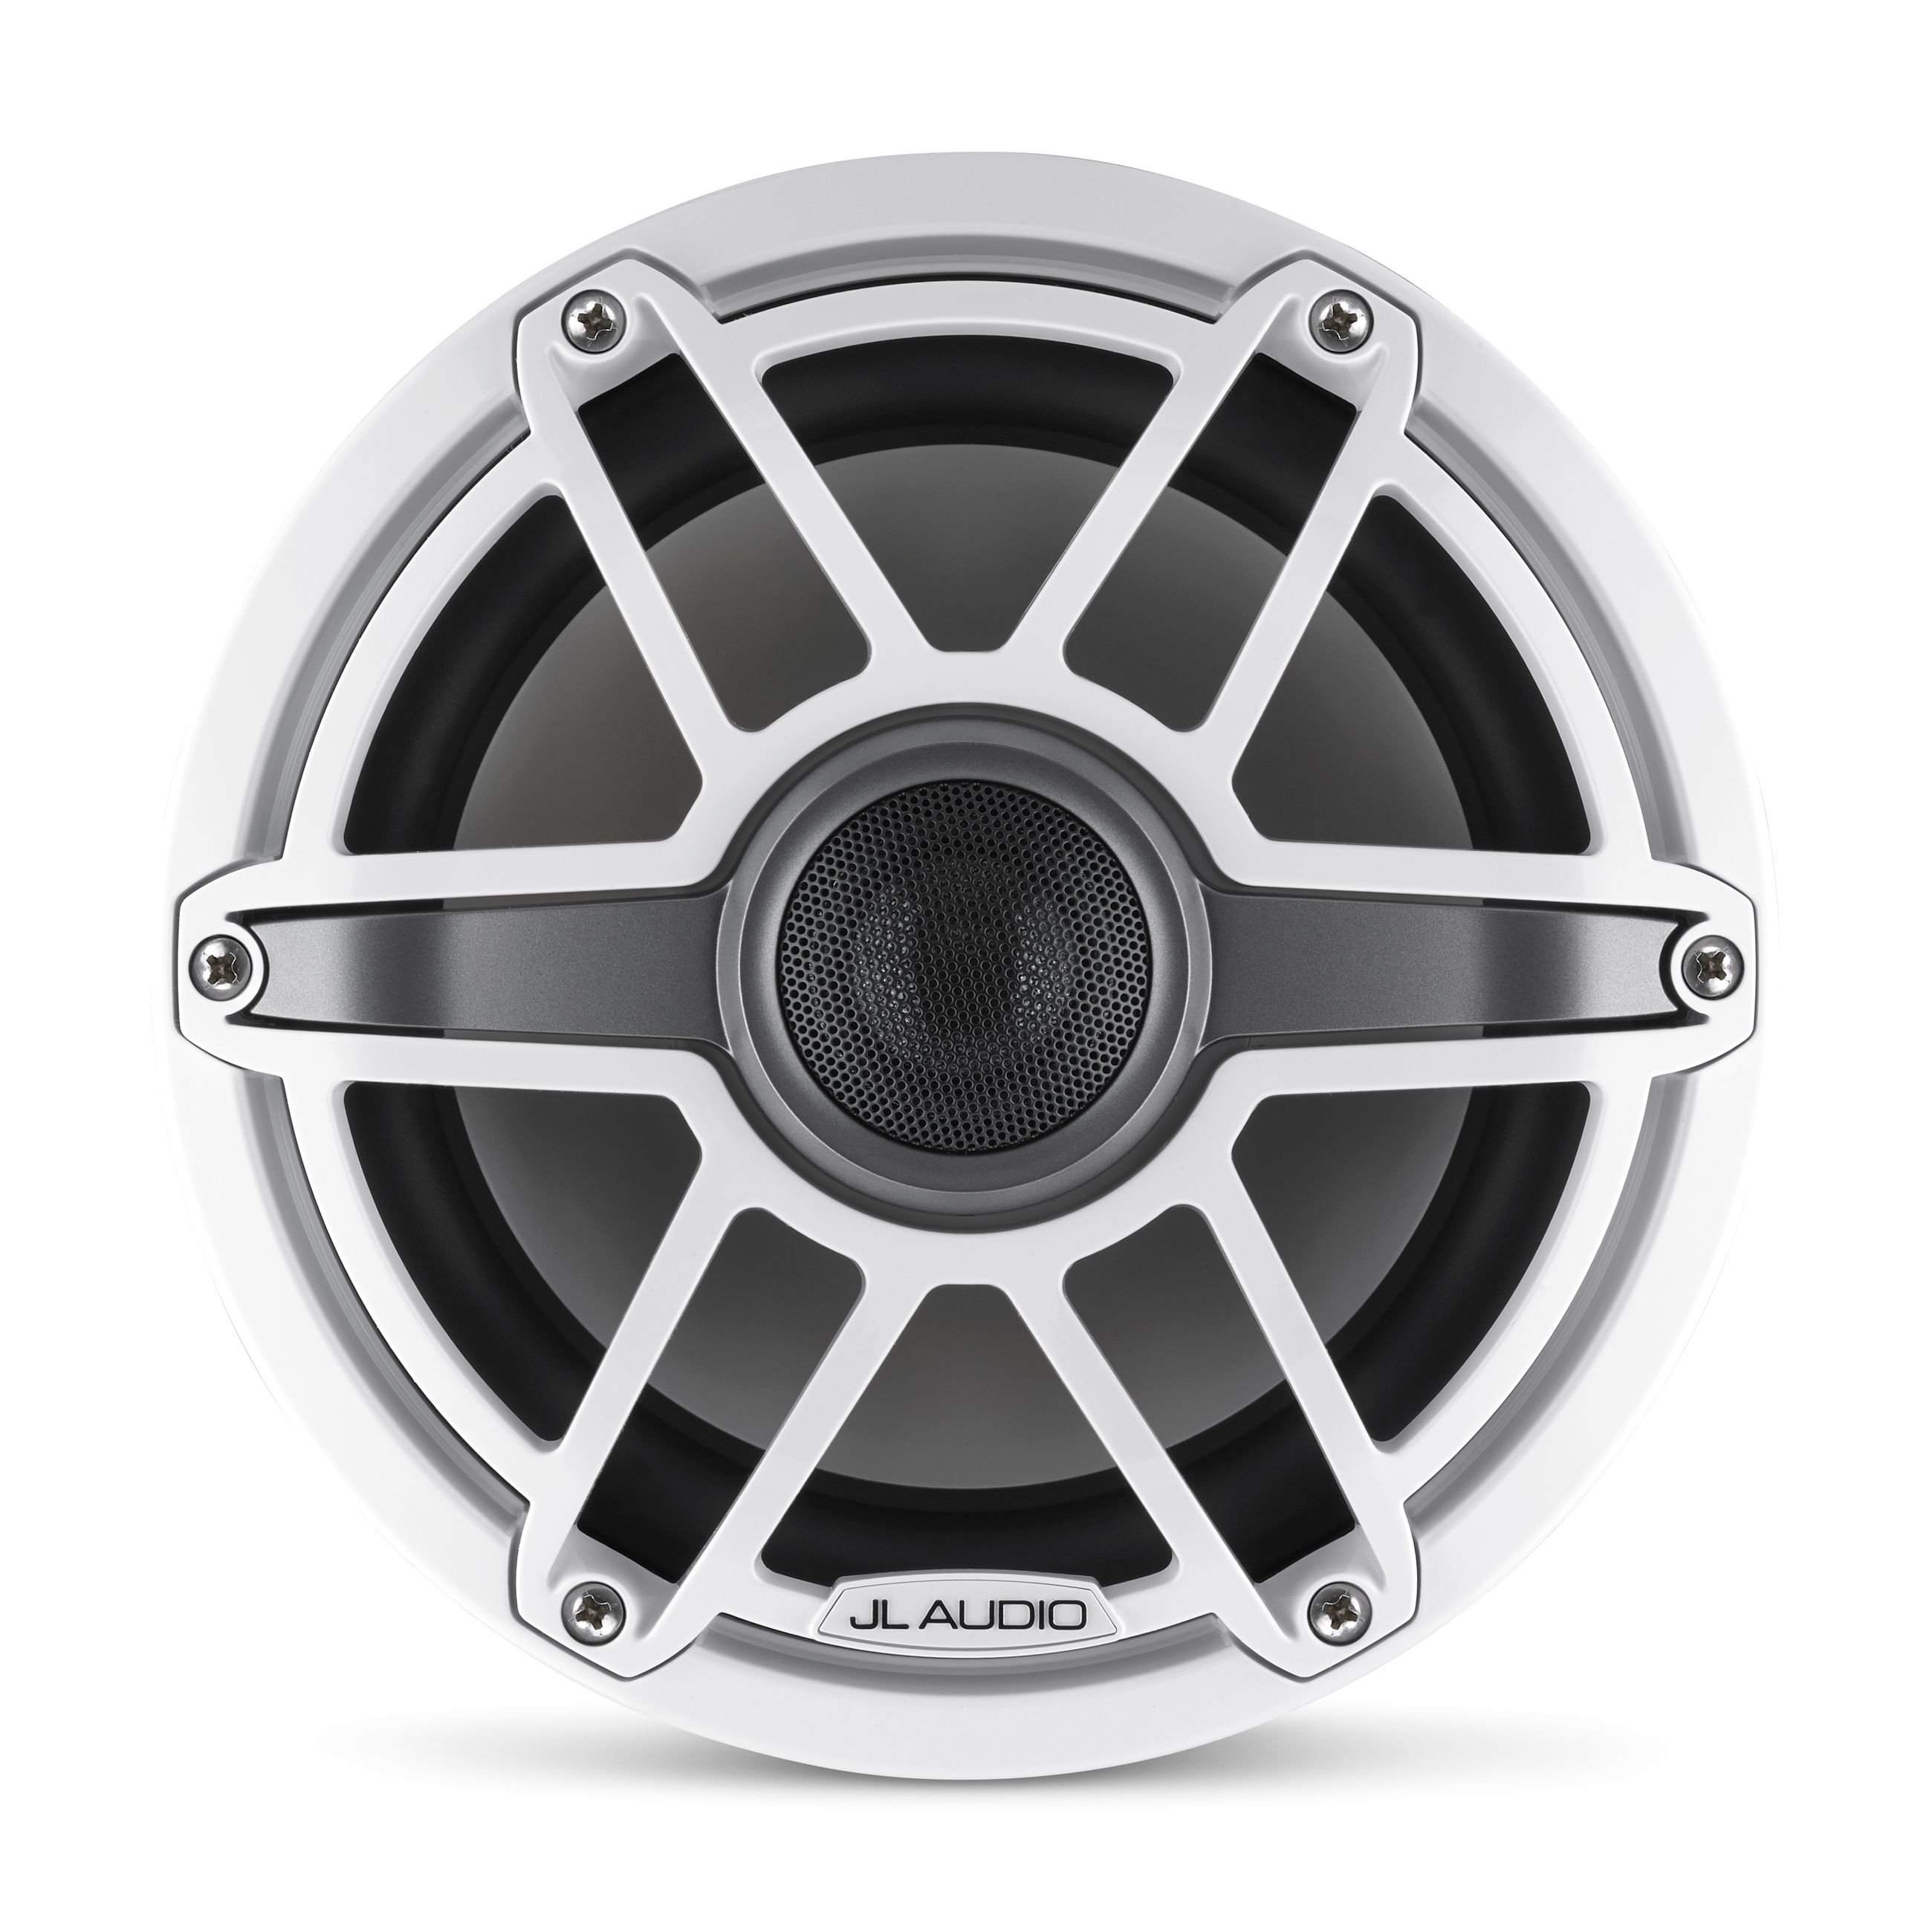 Overview image of a JL Audio M6 speaker in the 8.8 inch version.